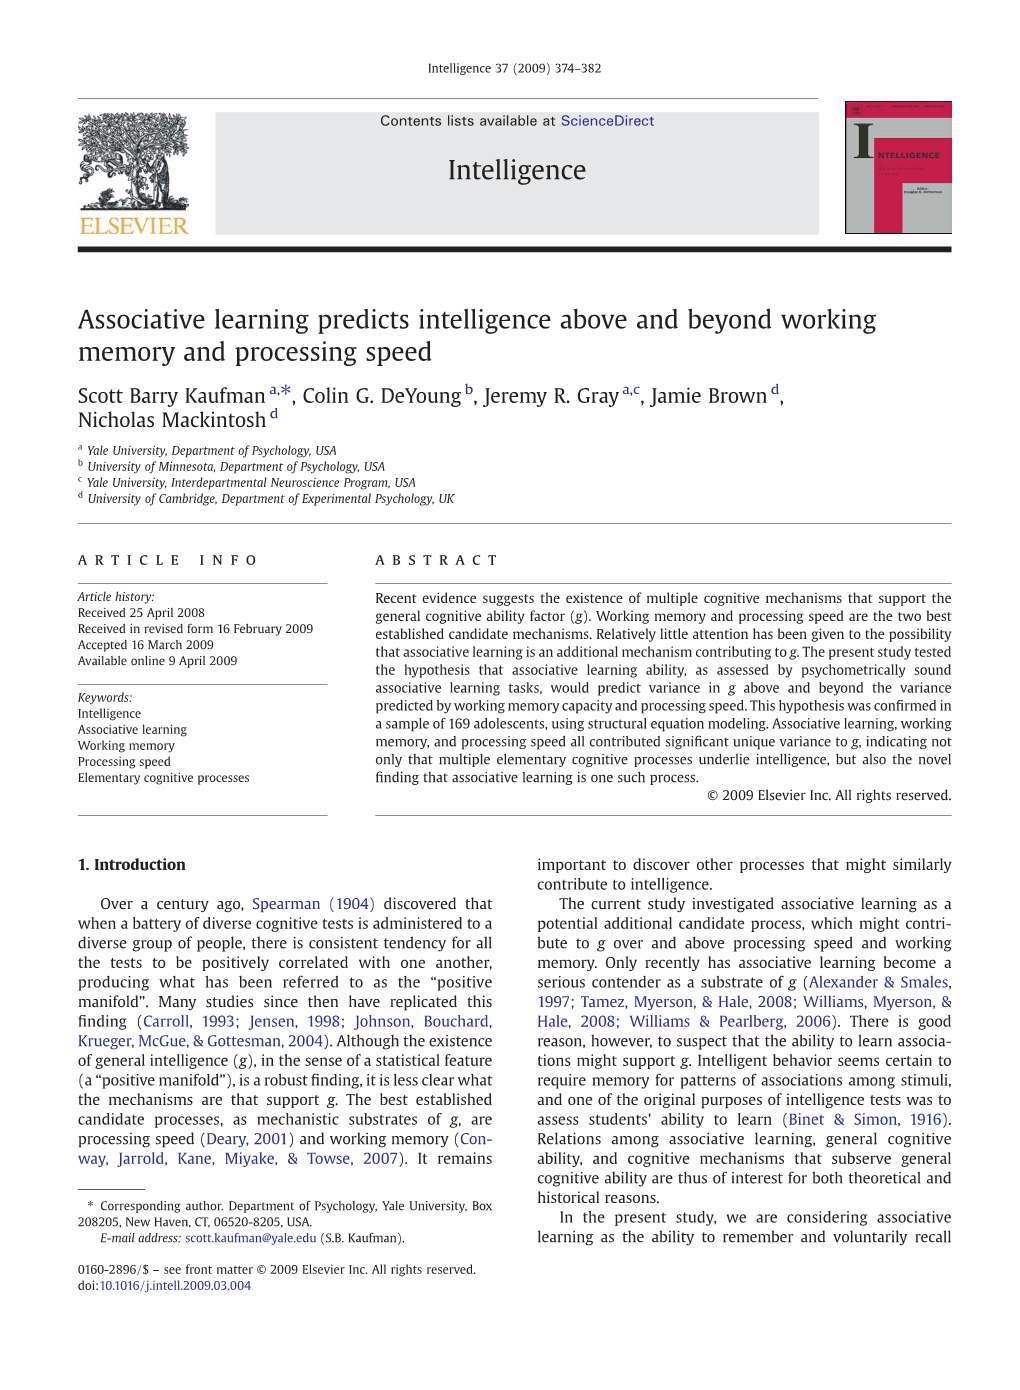 Associative Learning Predicts Intelligence Above and Beyond Working Memory and Processing Speed